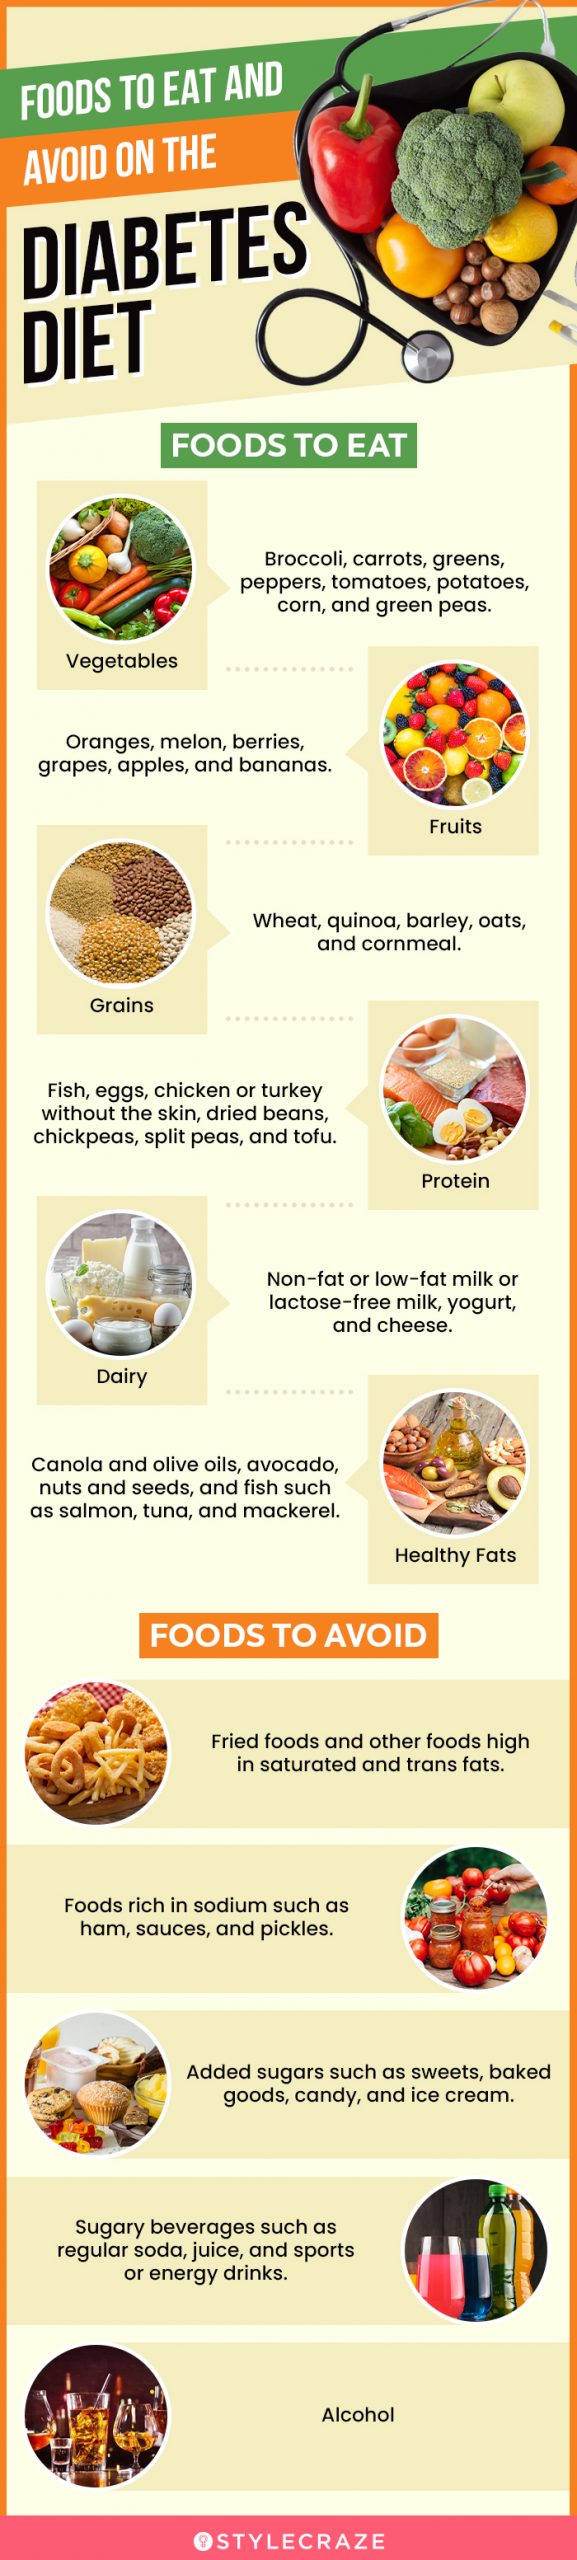 foods to eat and avoid on the diabetes diet (infographic)